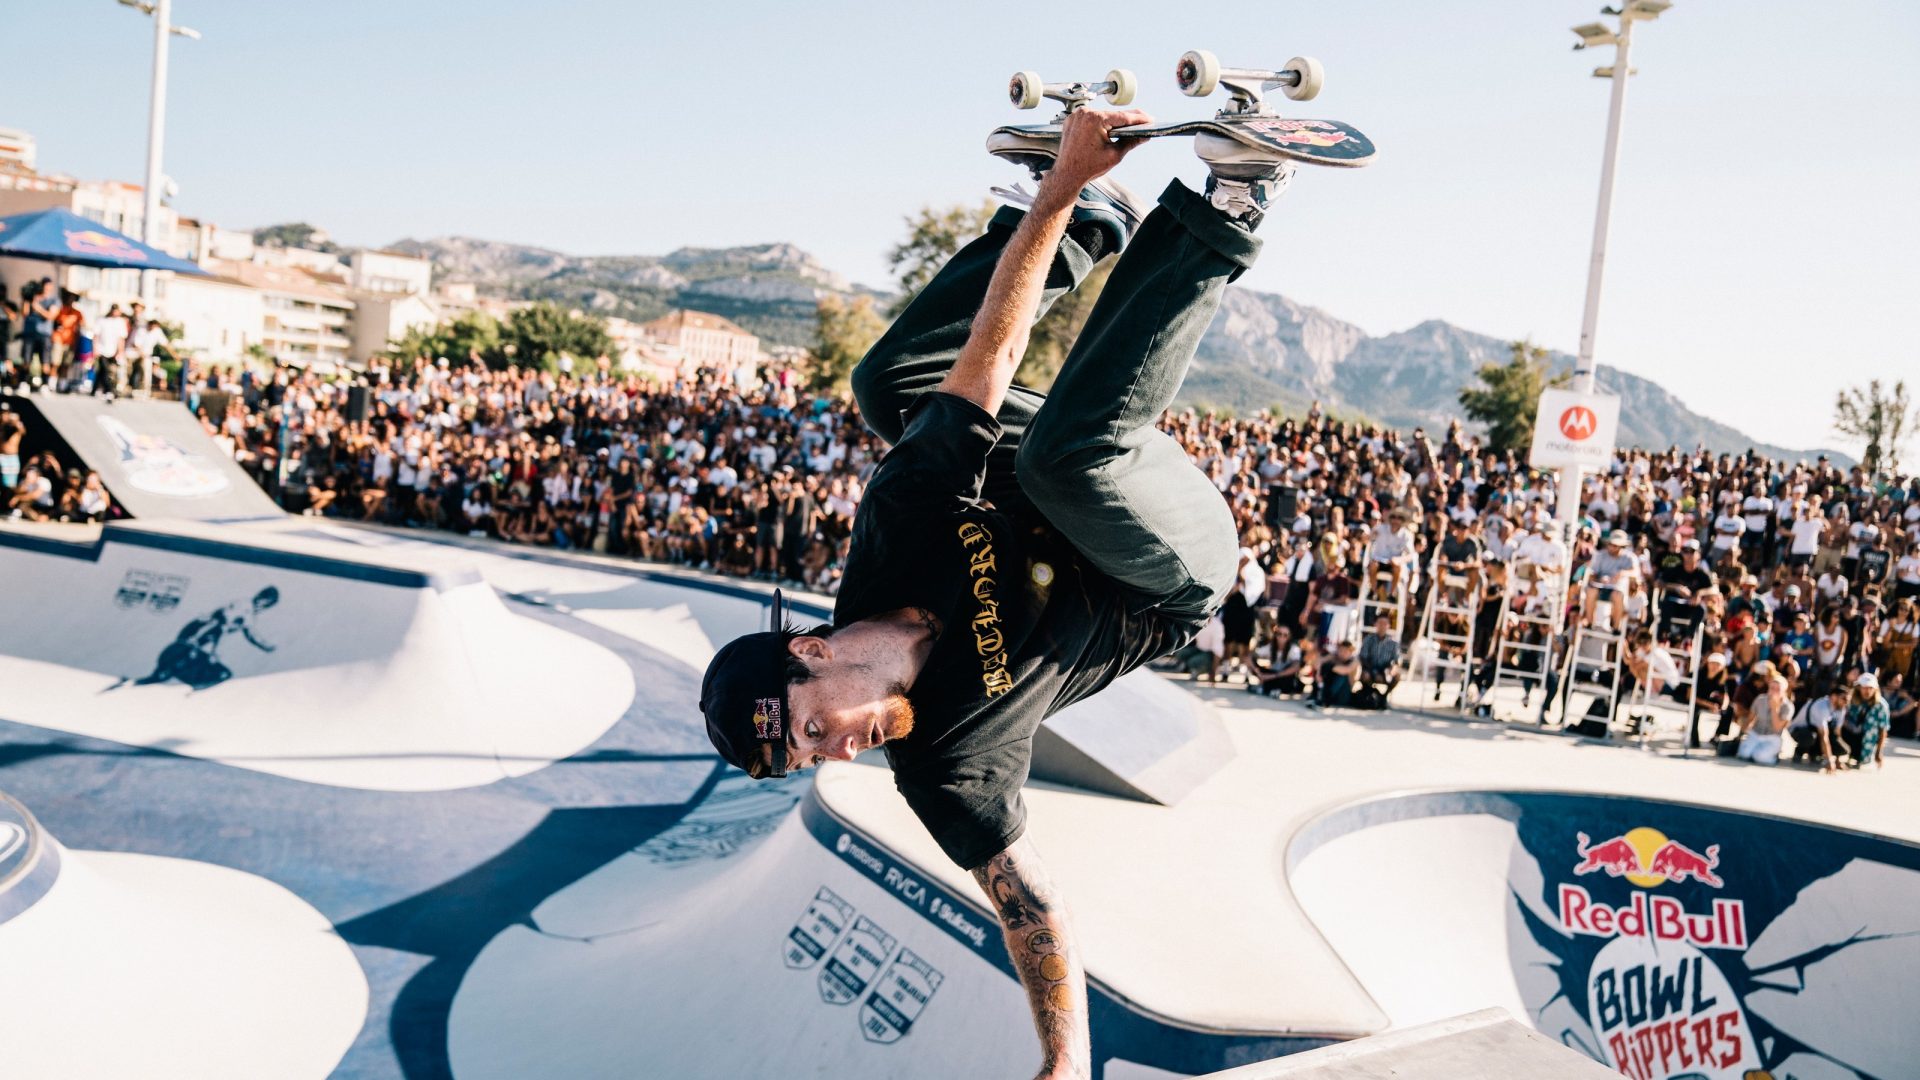 Marseille Red Bull Bowl Rippers 2019